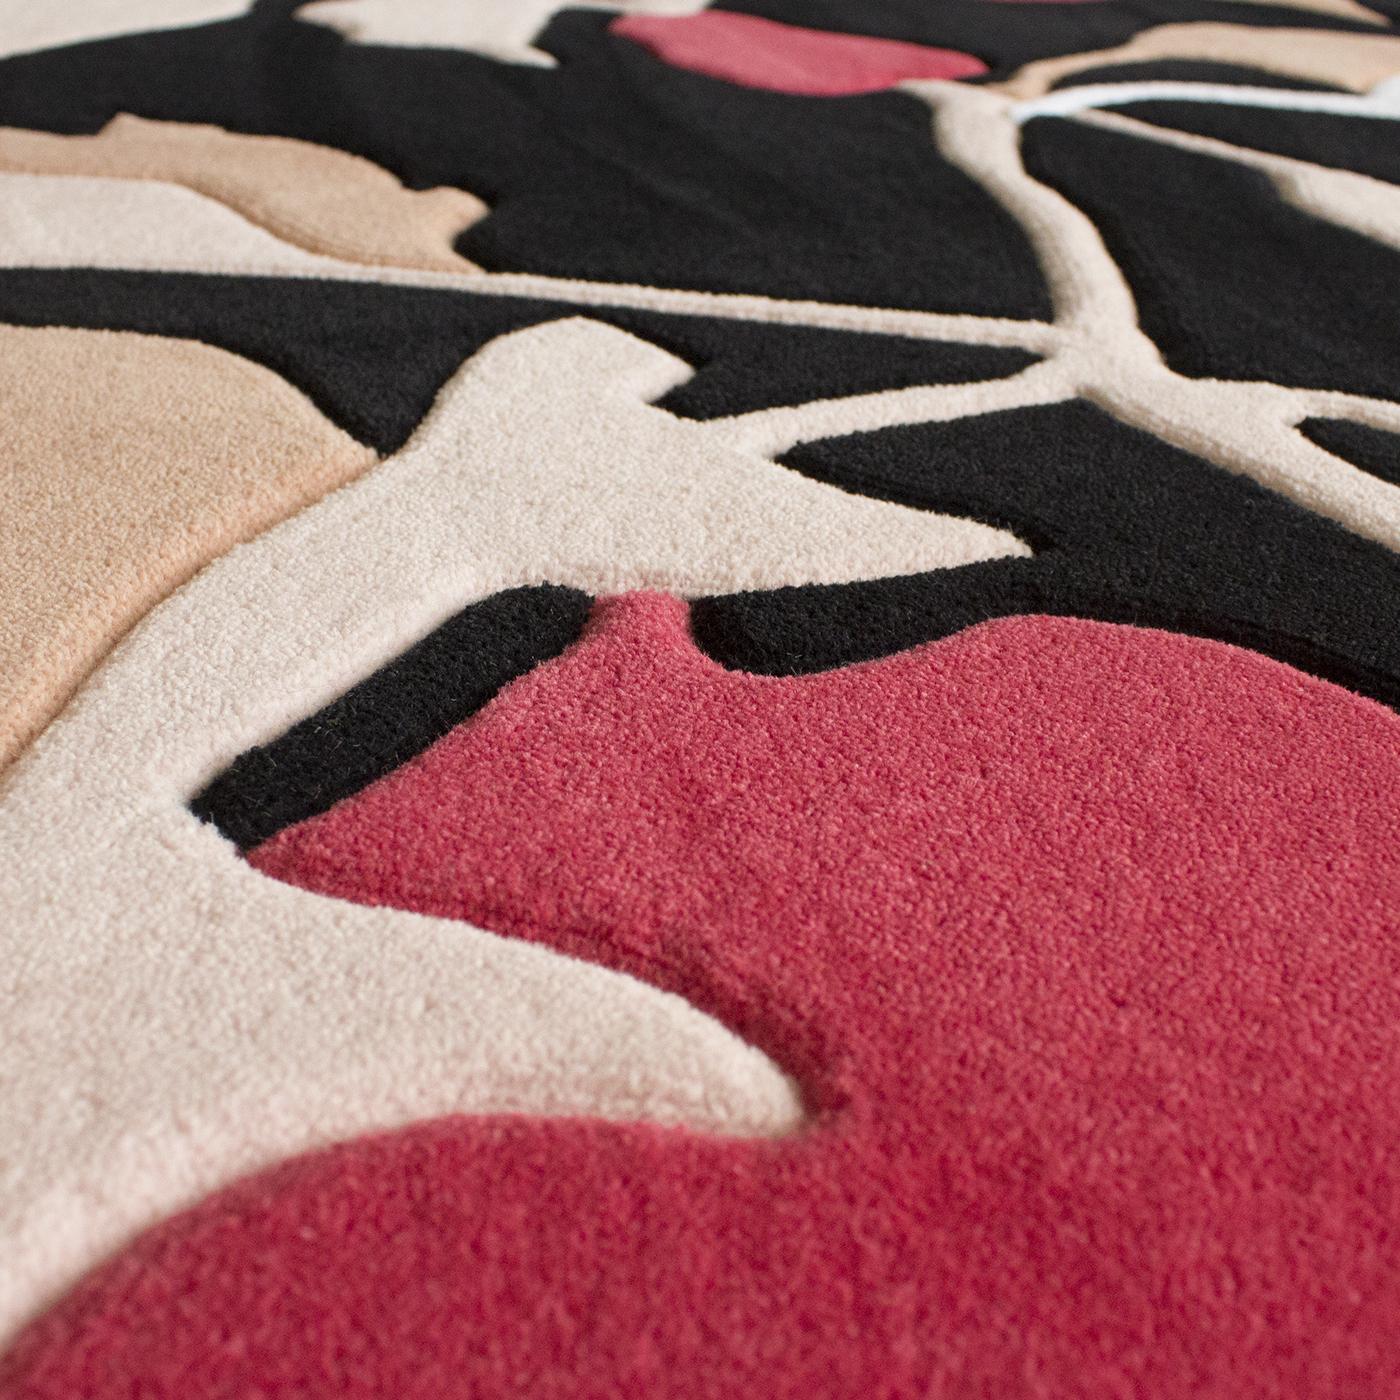 Designed from a drawing by Serena Confalonieri, this elegant round rug boasts a striking floral motif inspired by Japanese art in white, pink, and fuchsia enlivening a black background. This modern decorative piece is crafted entirely by expert